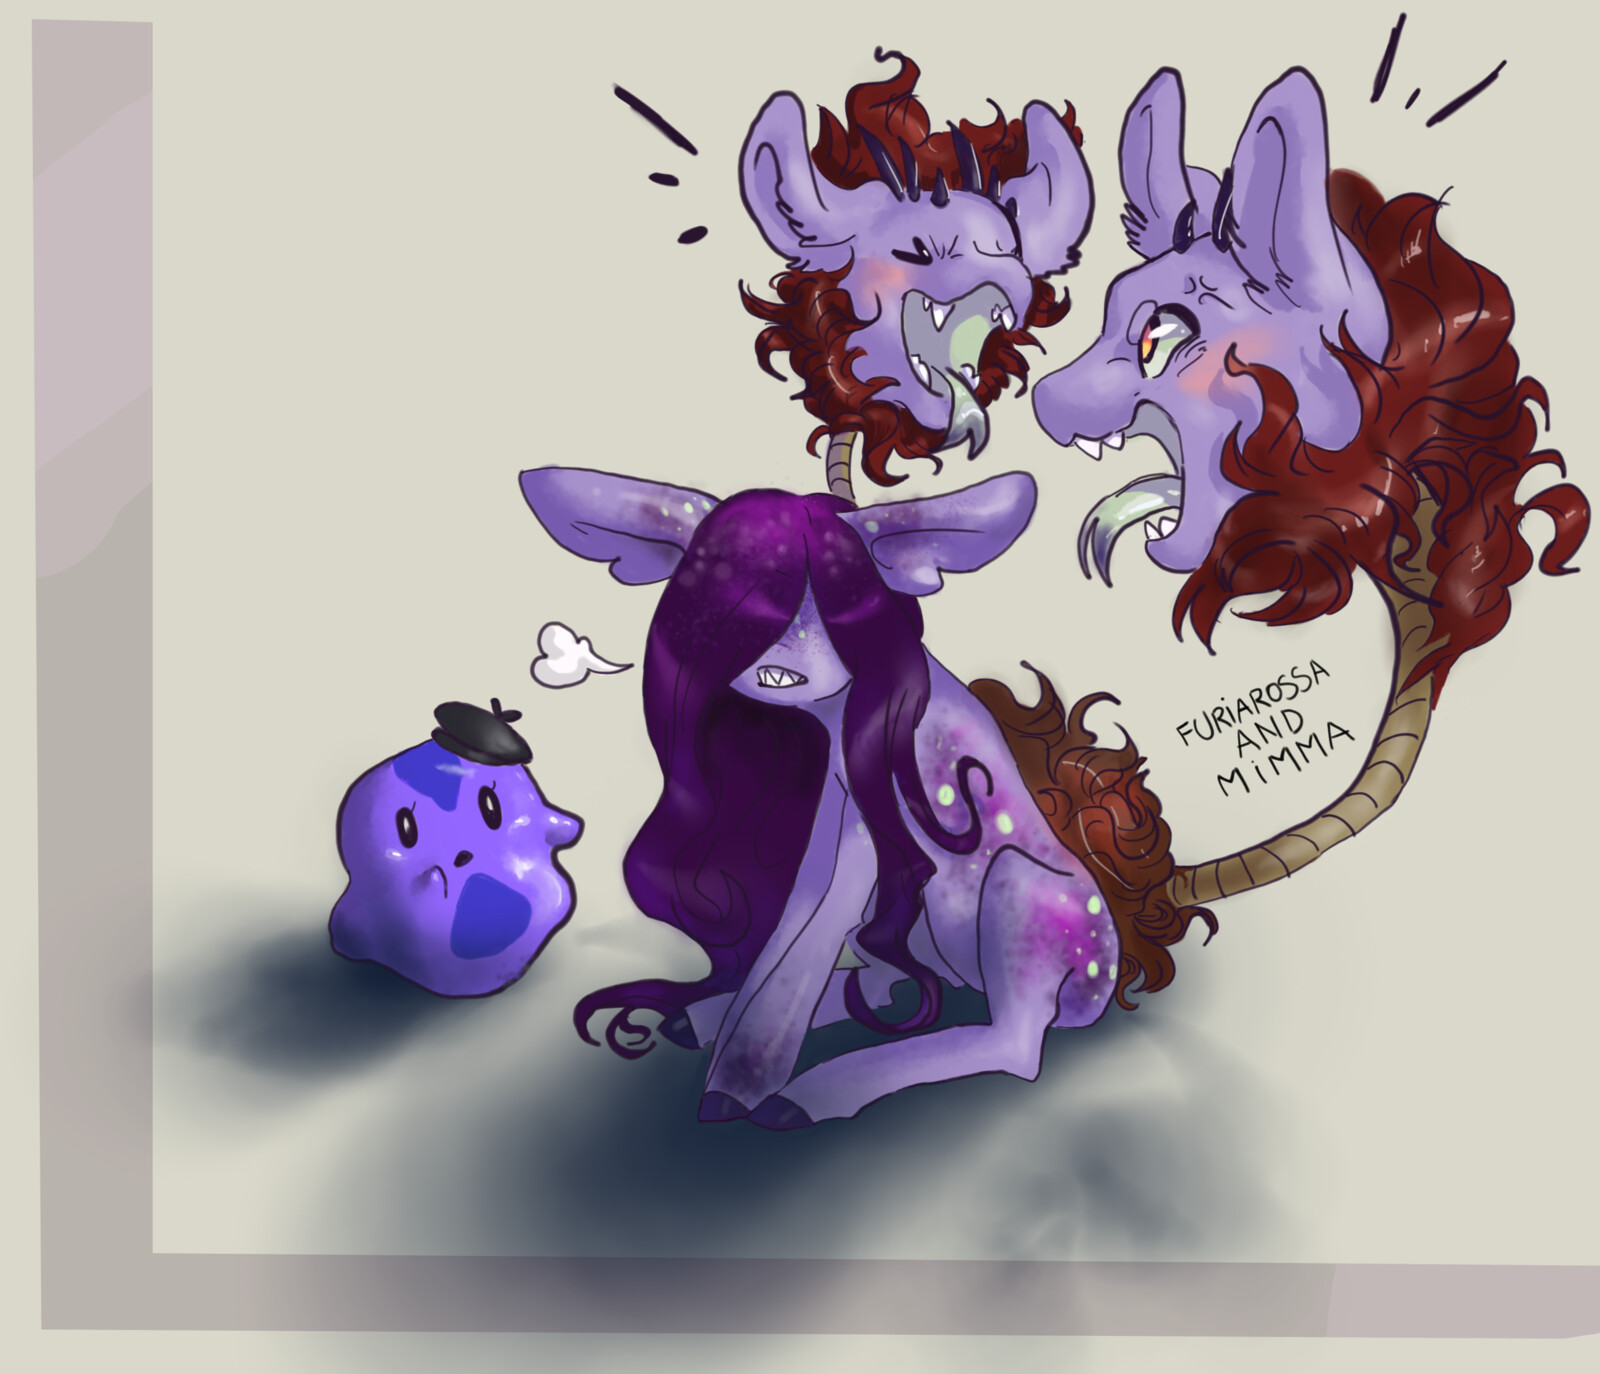 Artfight revenge again, vs  Aria-Suna-Kunoichi XD
A digital illustration of Karmin the ditto featuring also a character from another artist, xFroggiii, a weird pony, Ban Sheea, Pain and Panic.
